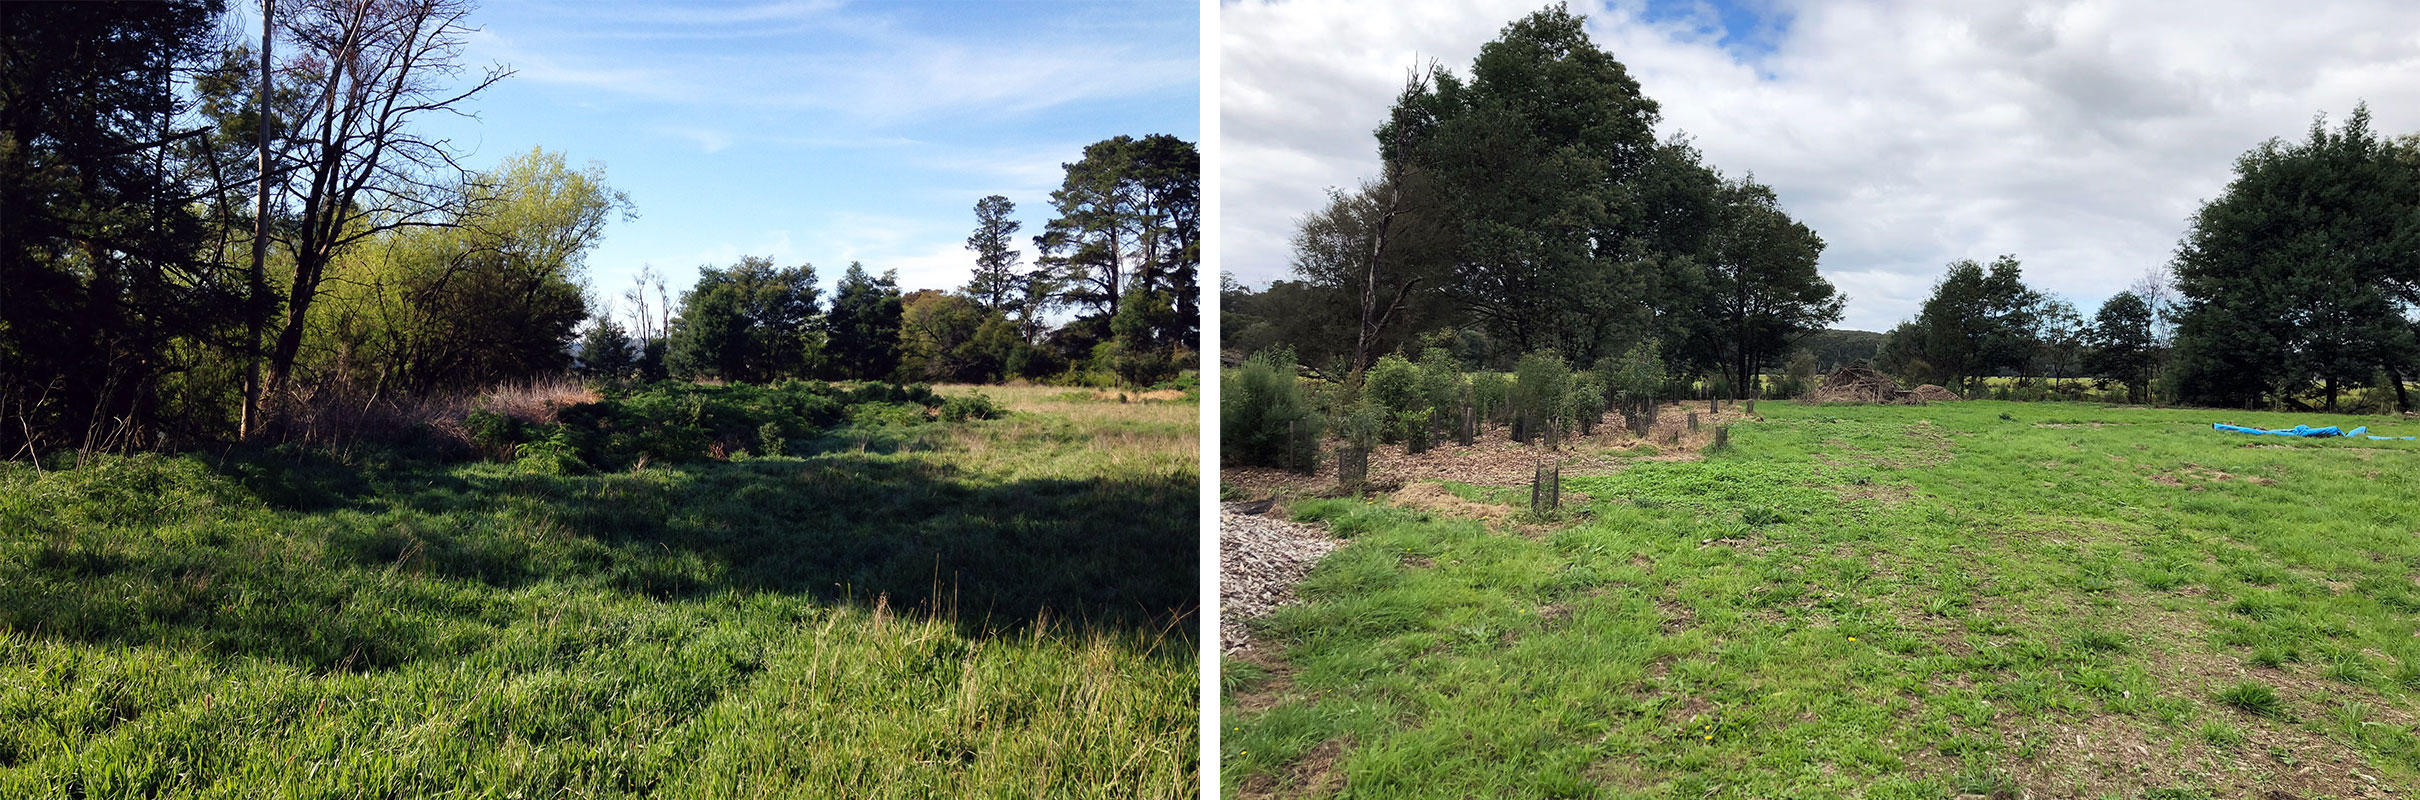 Photo composite of grassy area overshadowed by willow trees (before), and the same area with trees cleared